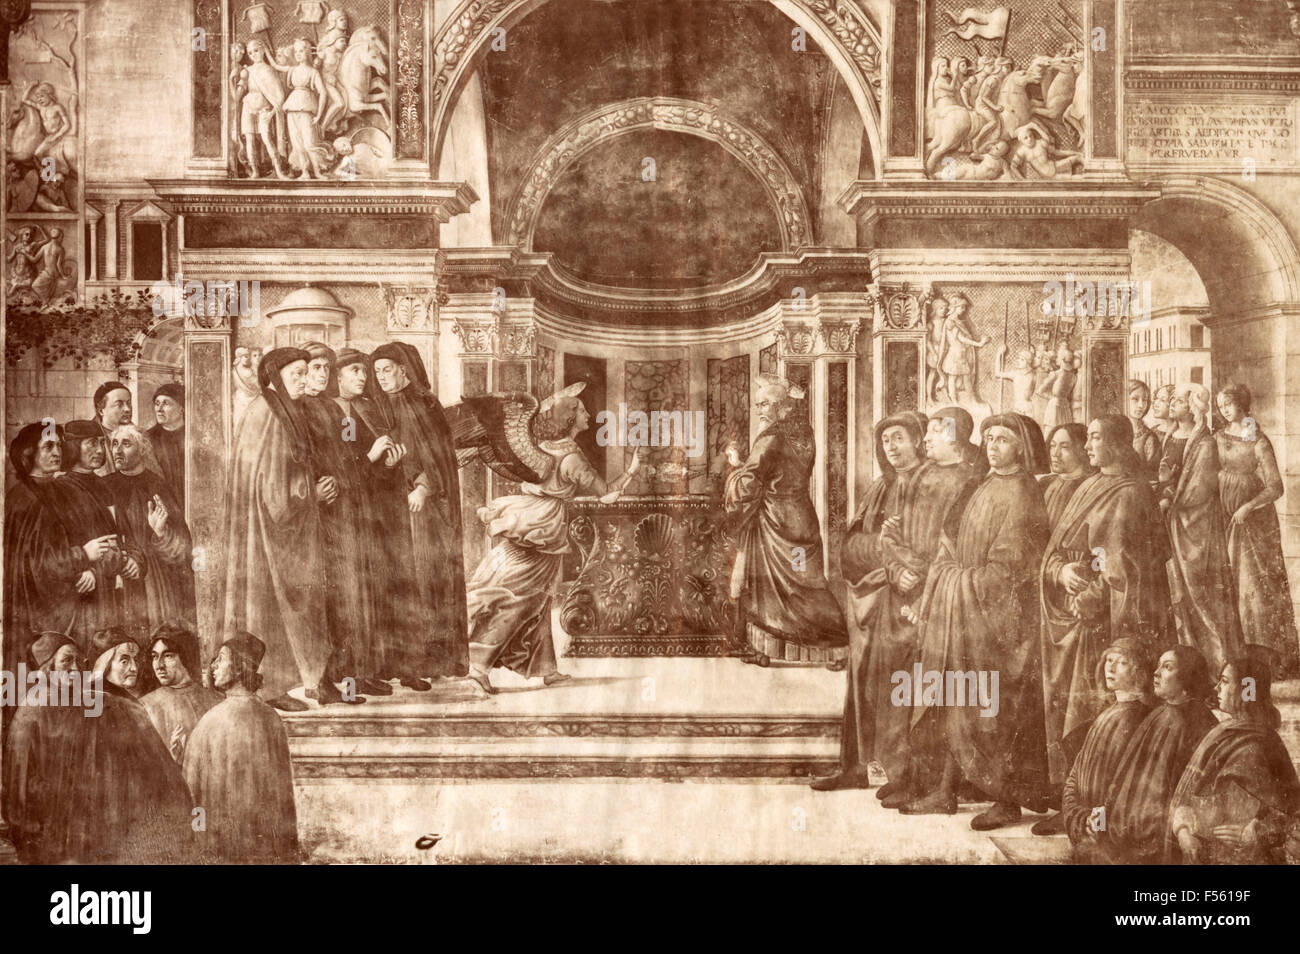 Church of Santa Maria Novella, Florence: The Patriarch Zacharias in the Temple, painted by Domenico Ghirlandaio Stock Photo